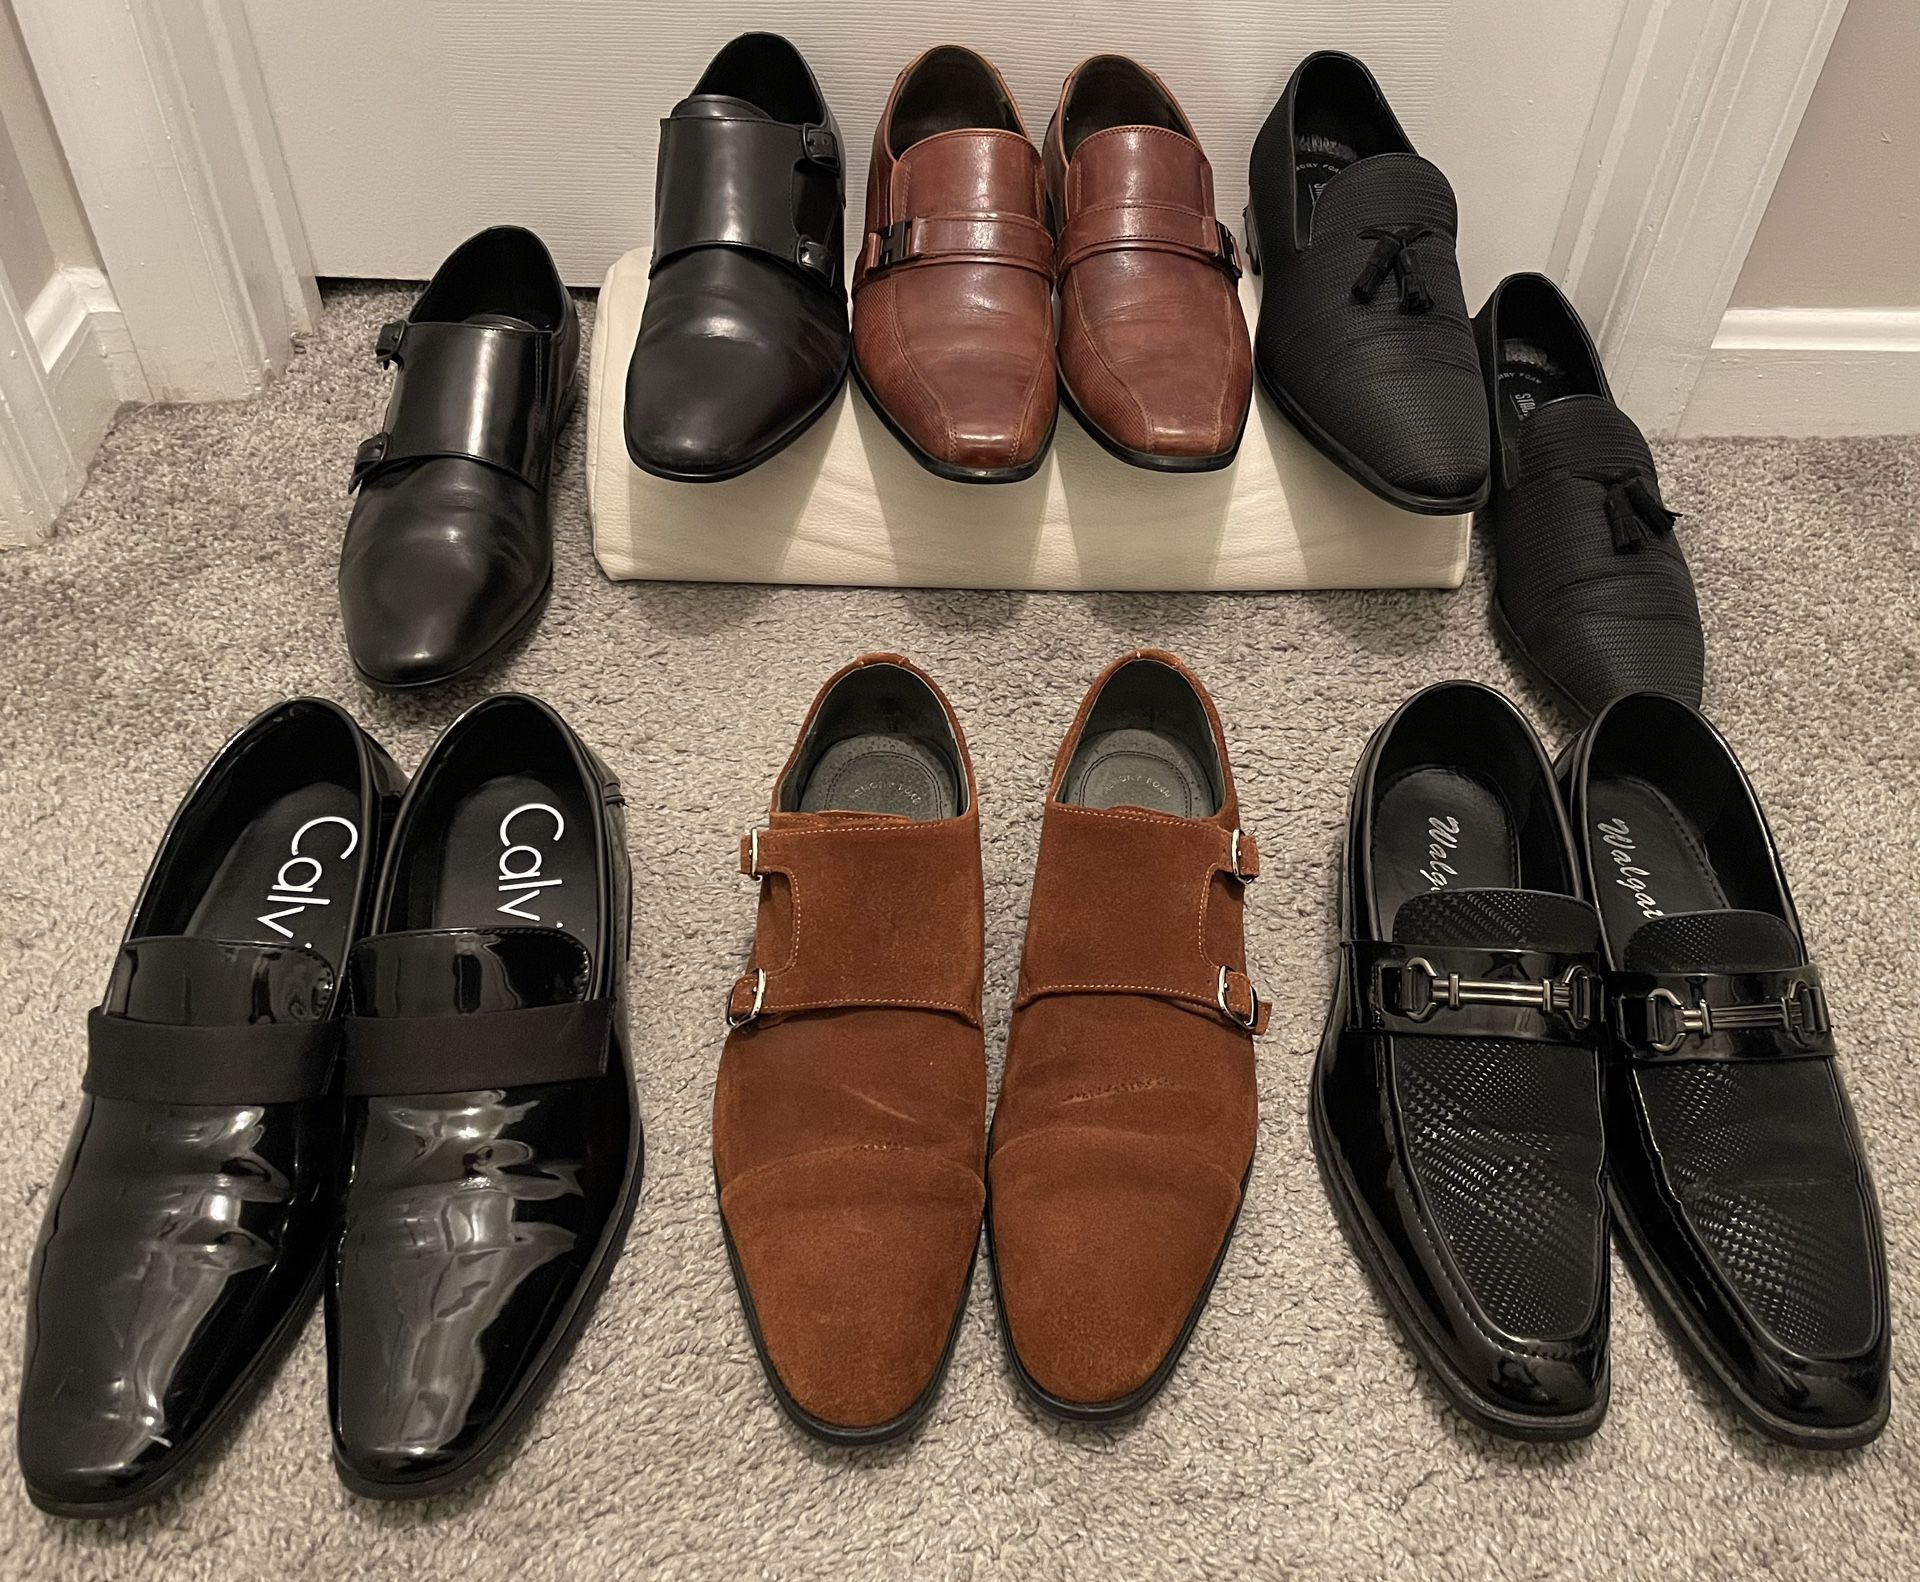 Men’s Calvin Klein/Stacy Adams Dress Shoes (priced Separately)